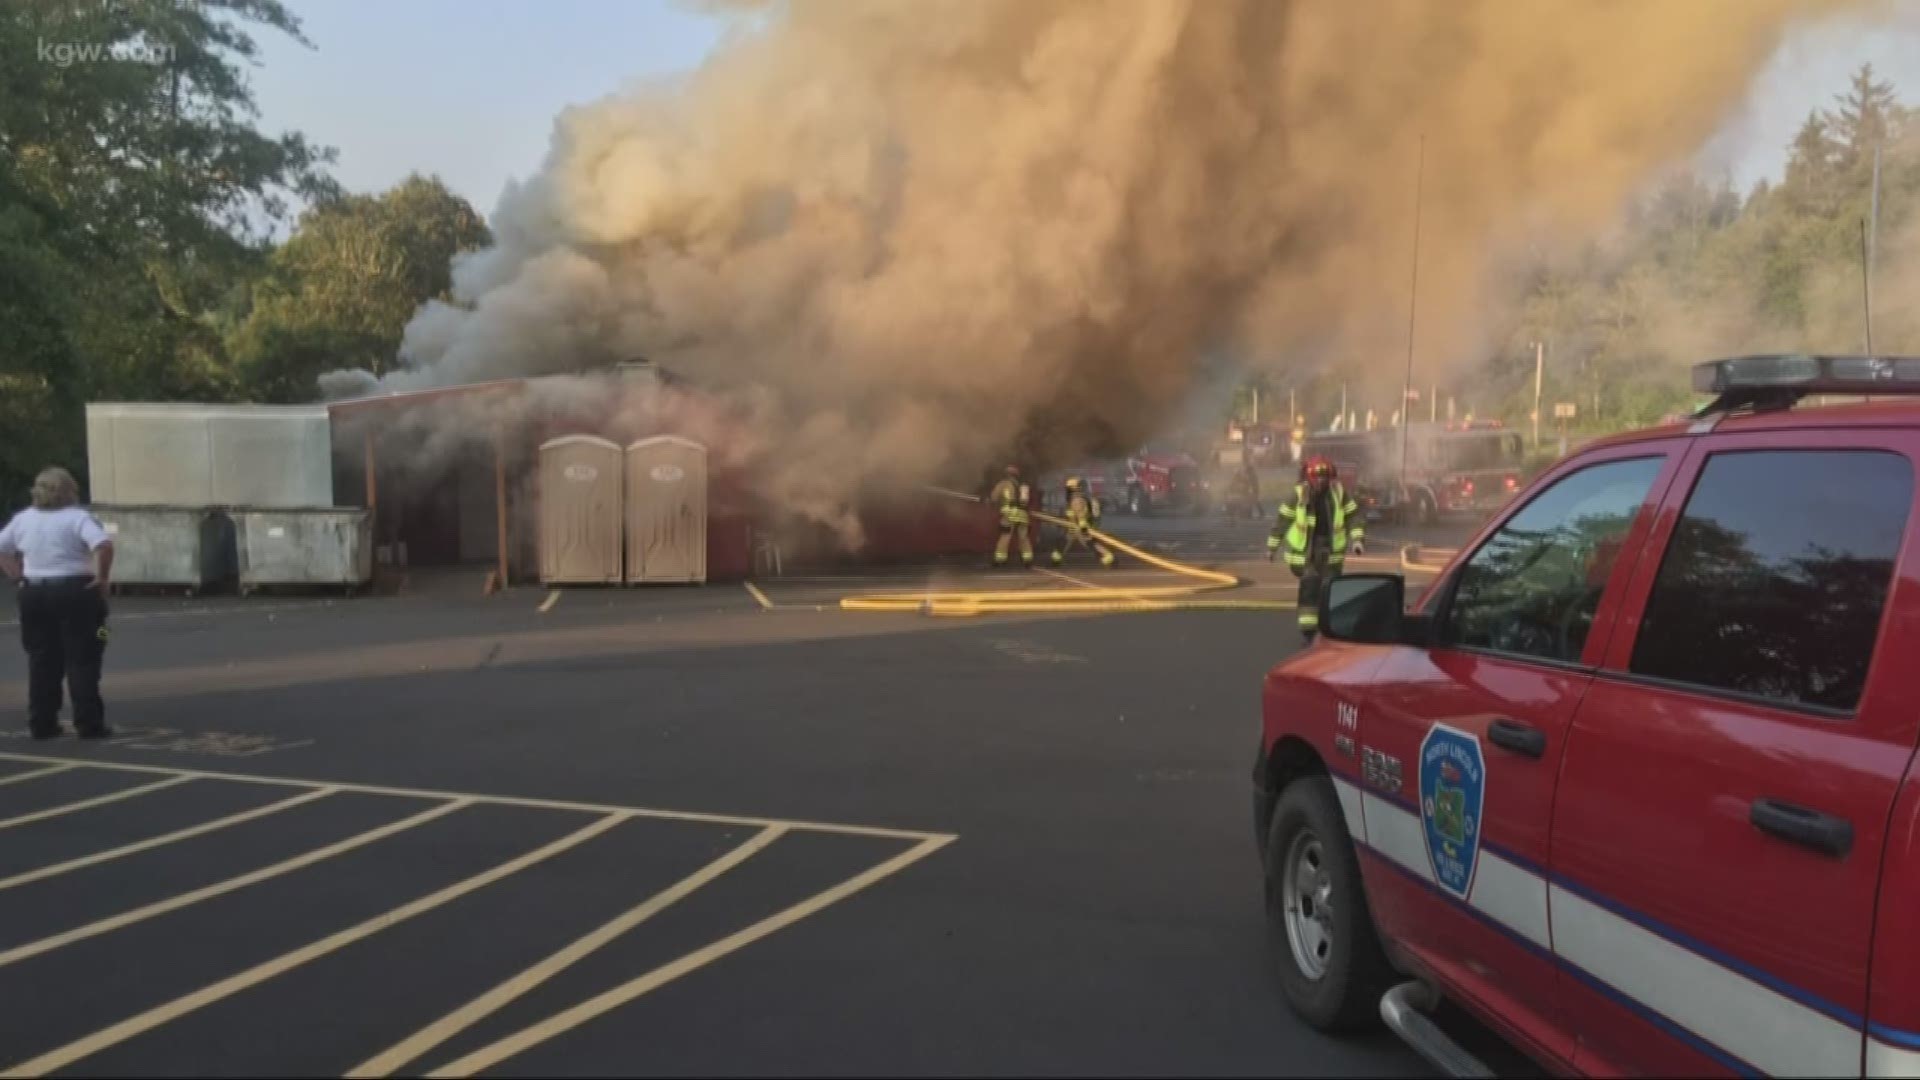 The community is devastated by the fire and is looking for ways to help get it back up and running as soon as possible, a Lincoln County Fire spokesperson said.